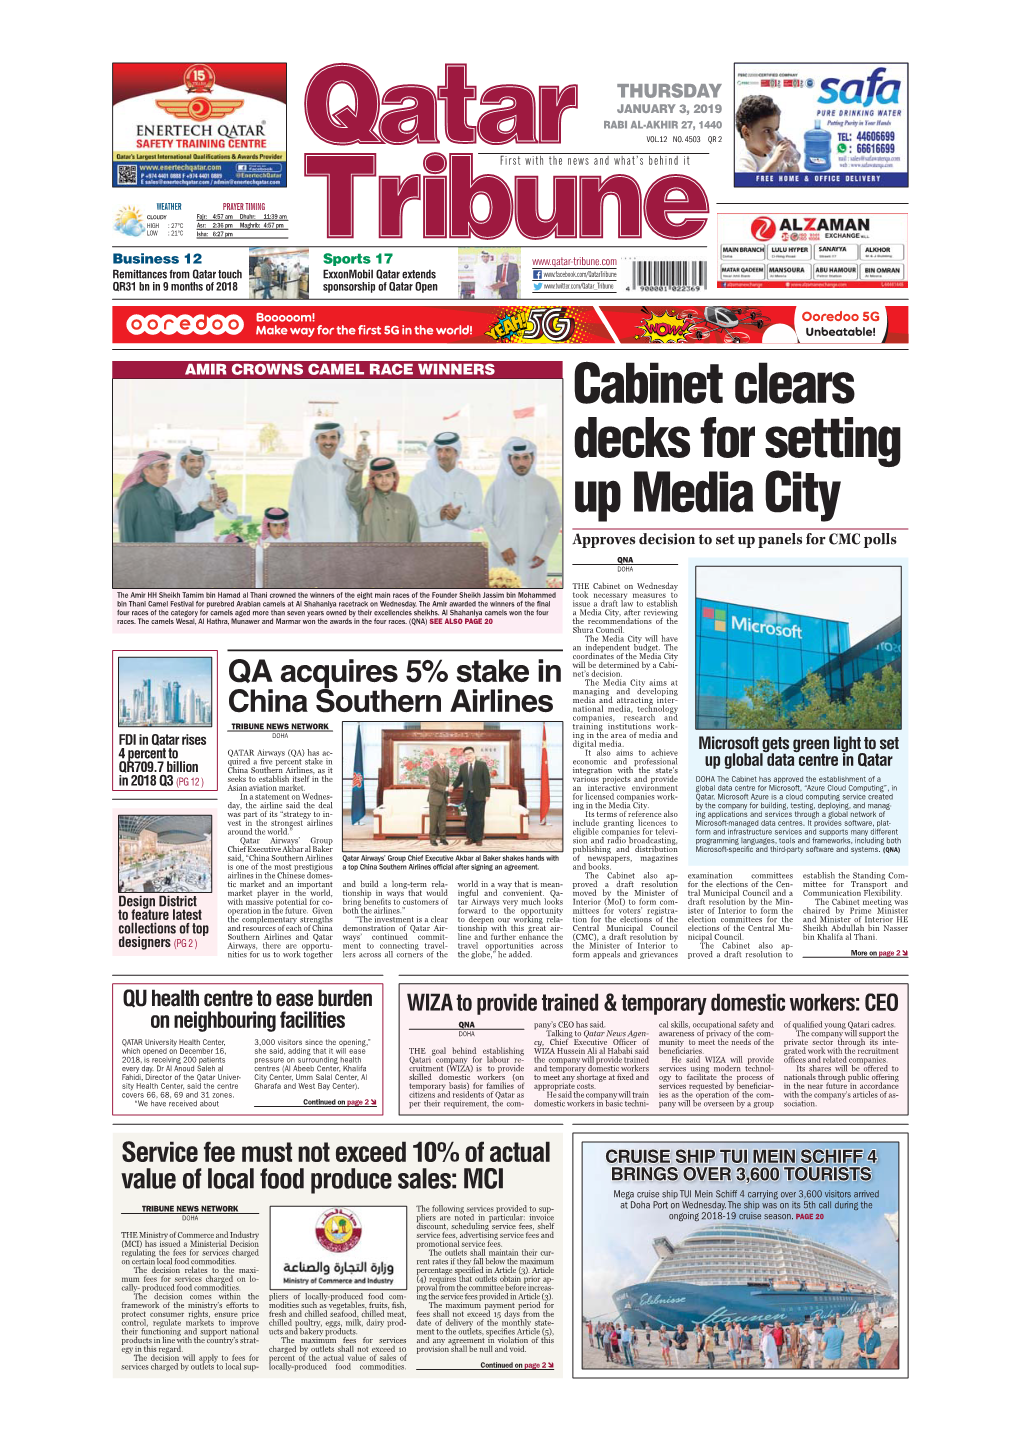 Cabinet Clears Decks for Setting up Media City Approves Decision to Set up Panels for CMC Polls QNA DOHA